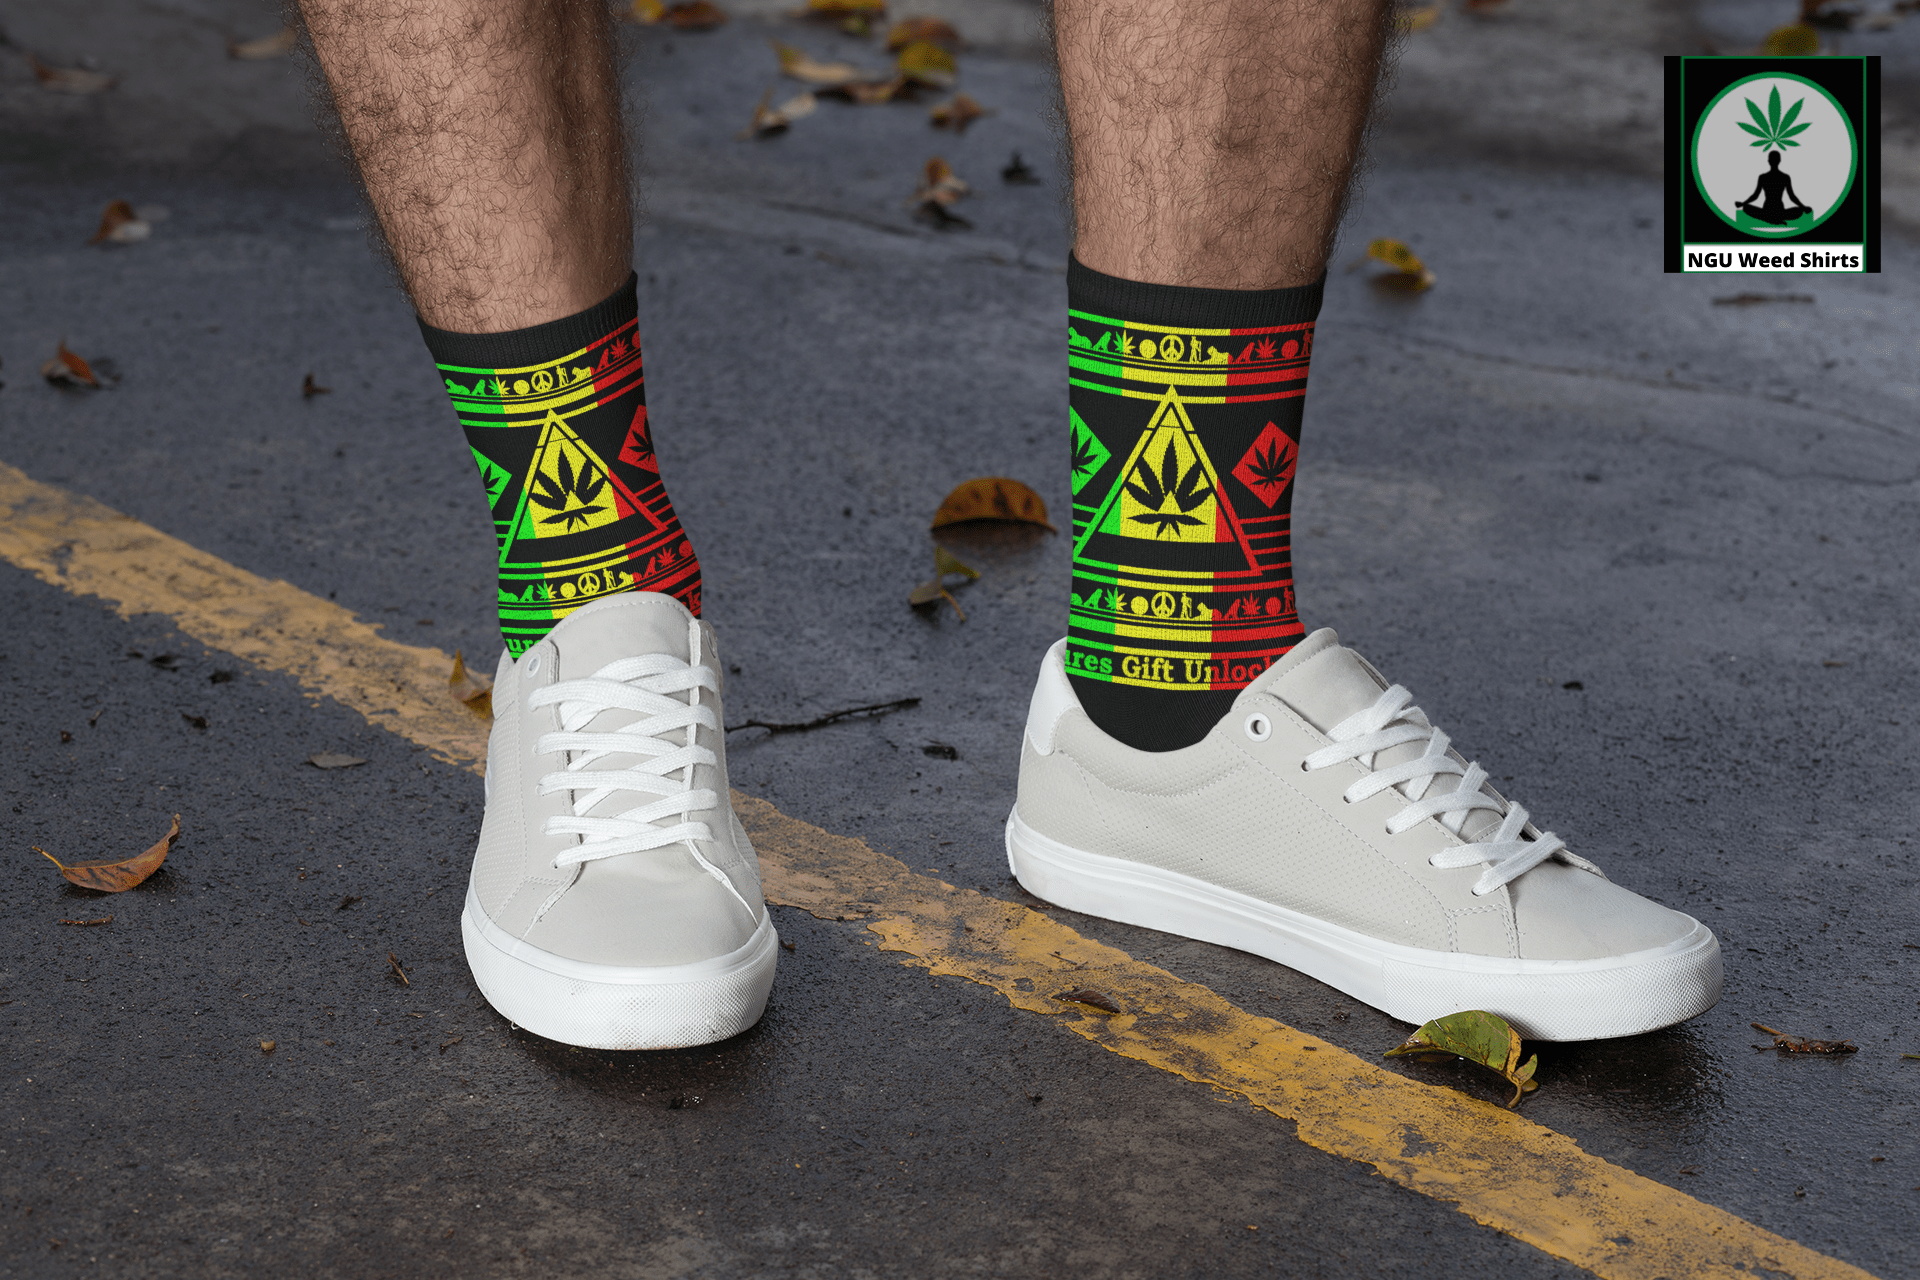 Pyramid Socks with Ancient Vibes Colorful Weed Socks Enter